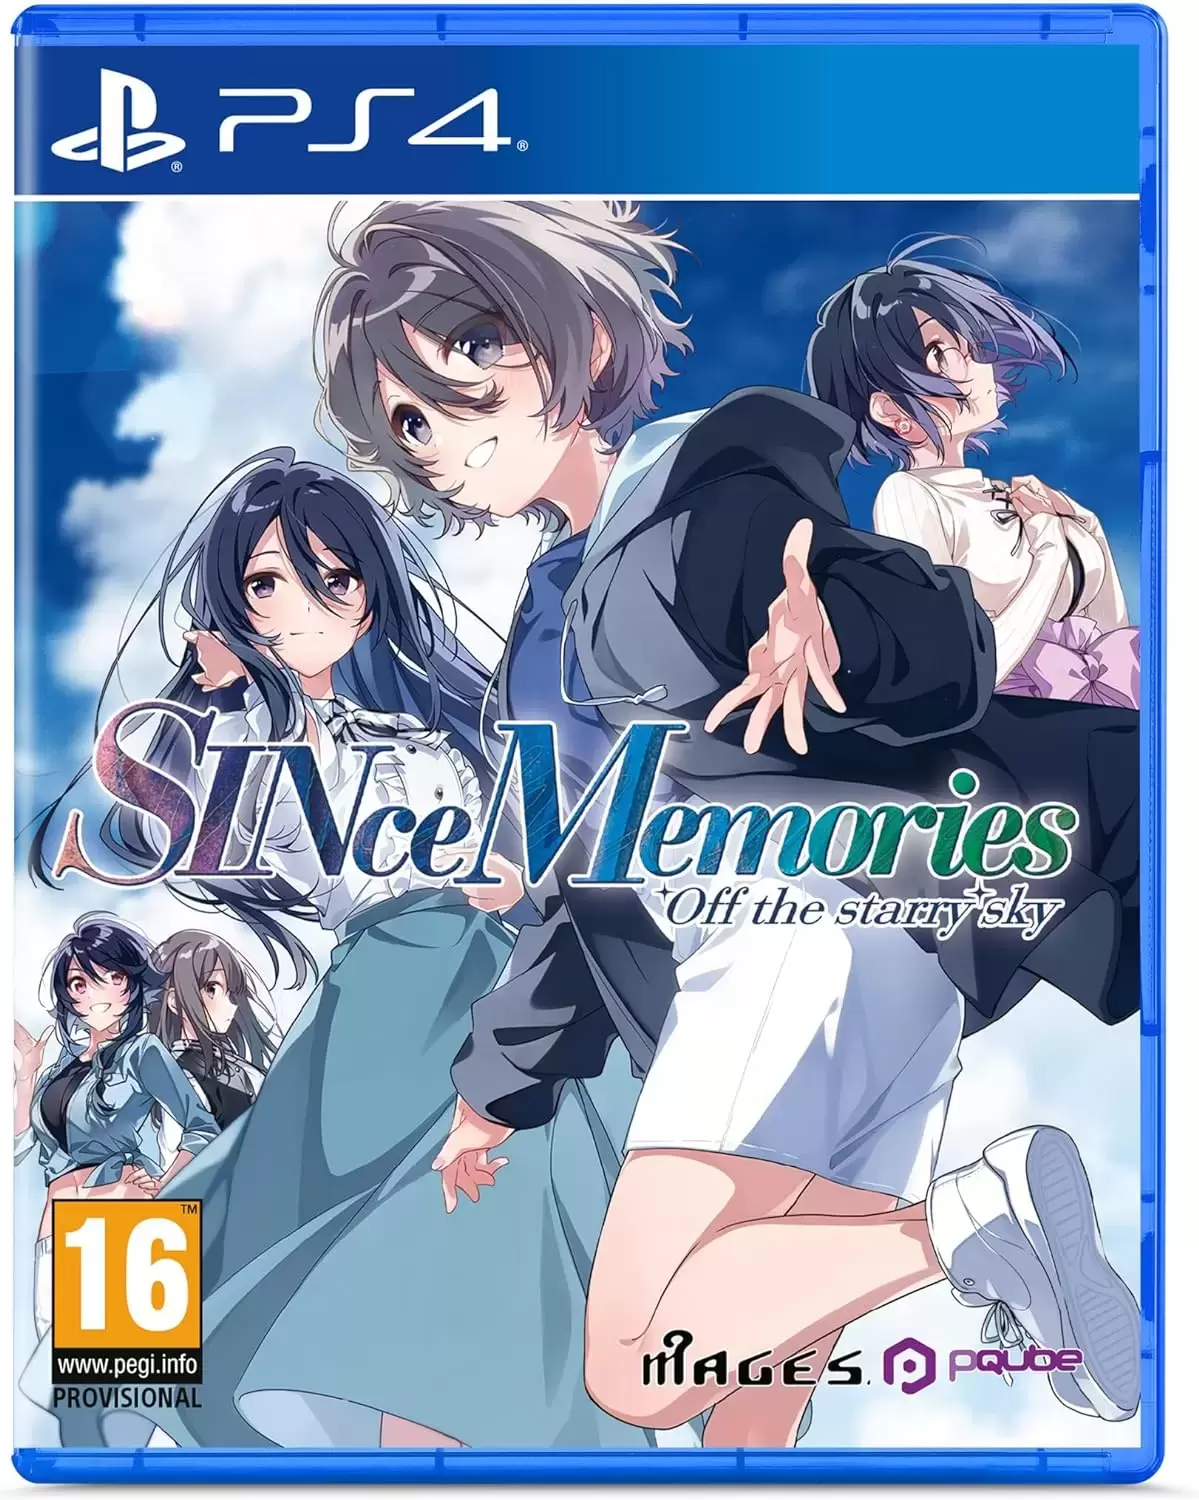 PS4 Games - SINce Memories - Off the starry sky